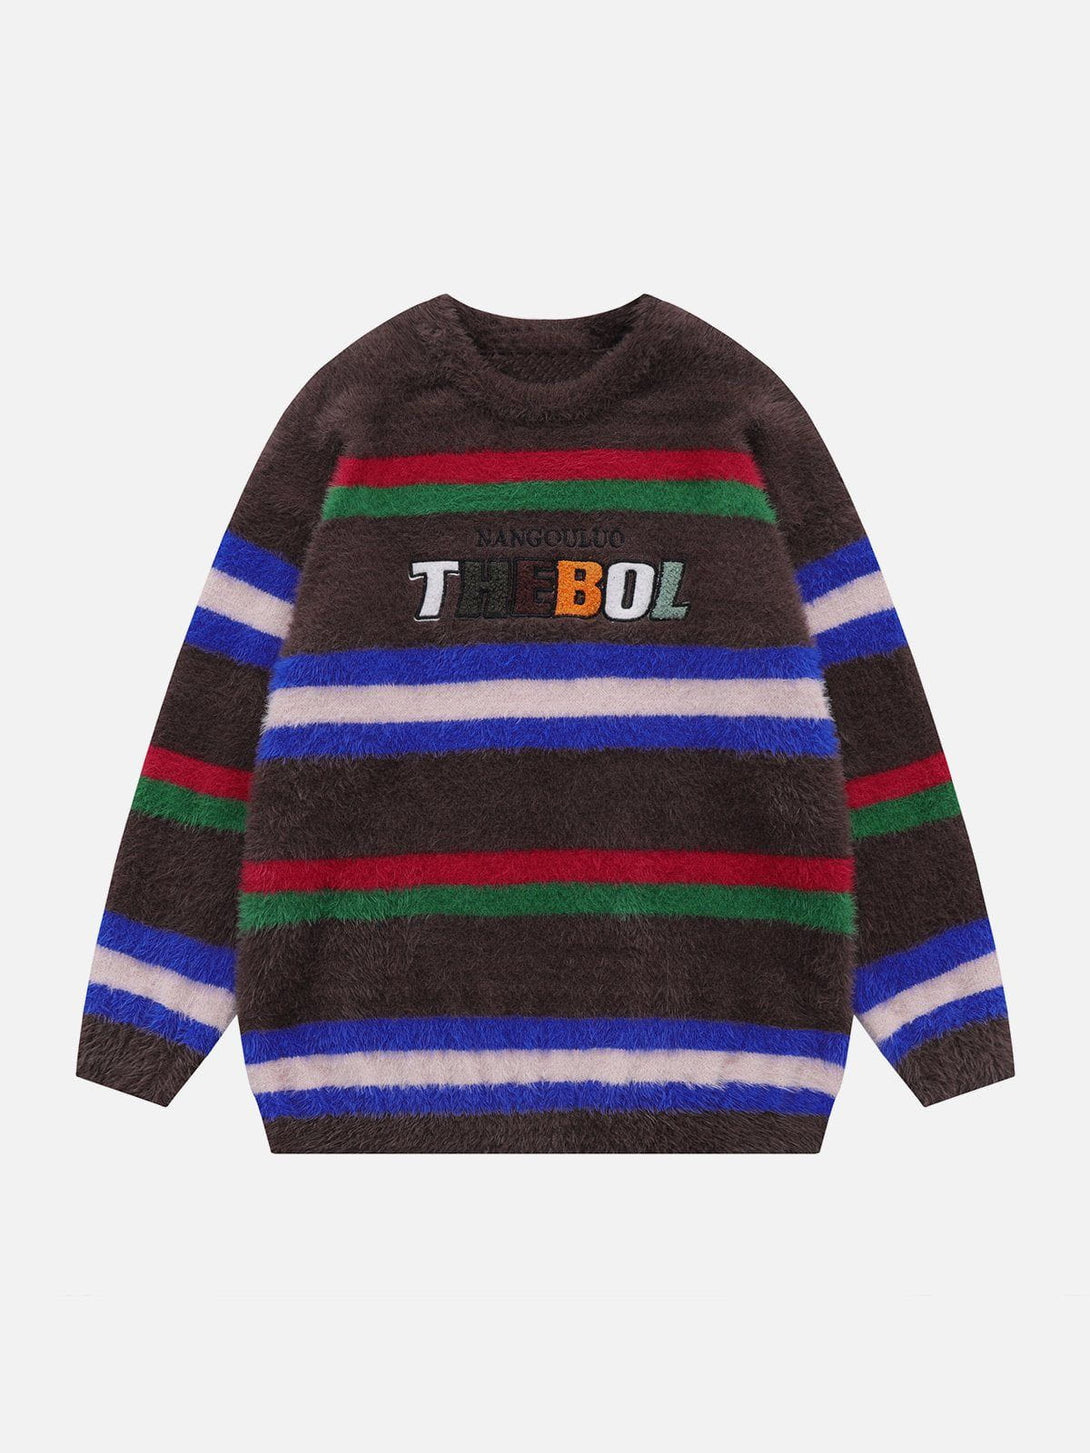 Levefly - Colorful Striped Letter Sweater - Streetwear Fashion - levefly.com